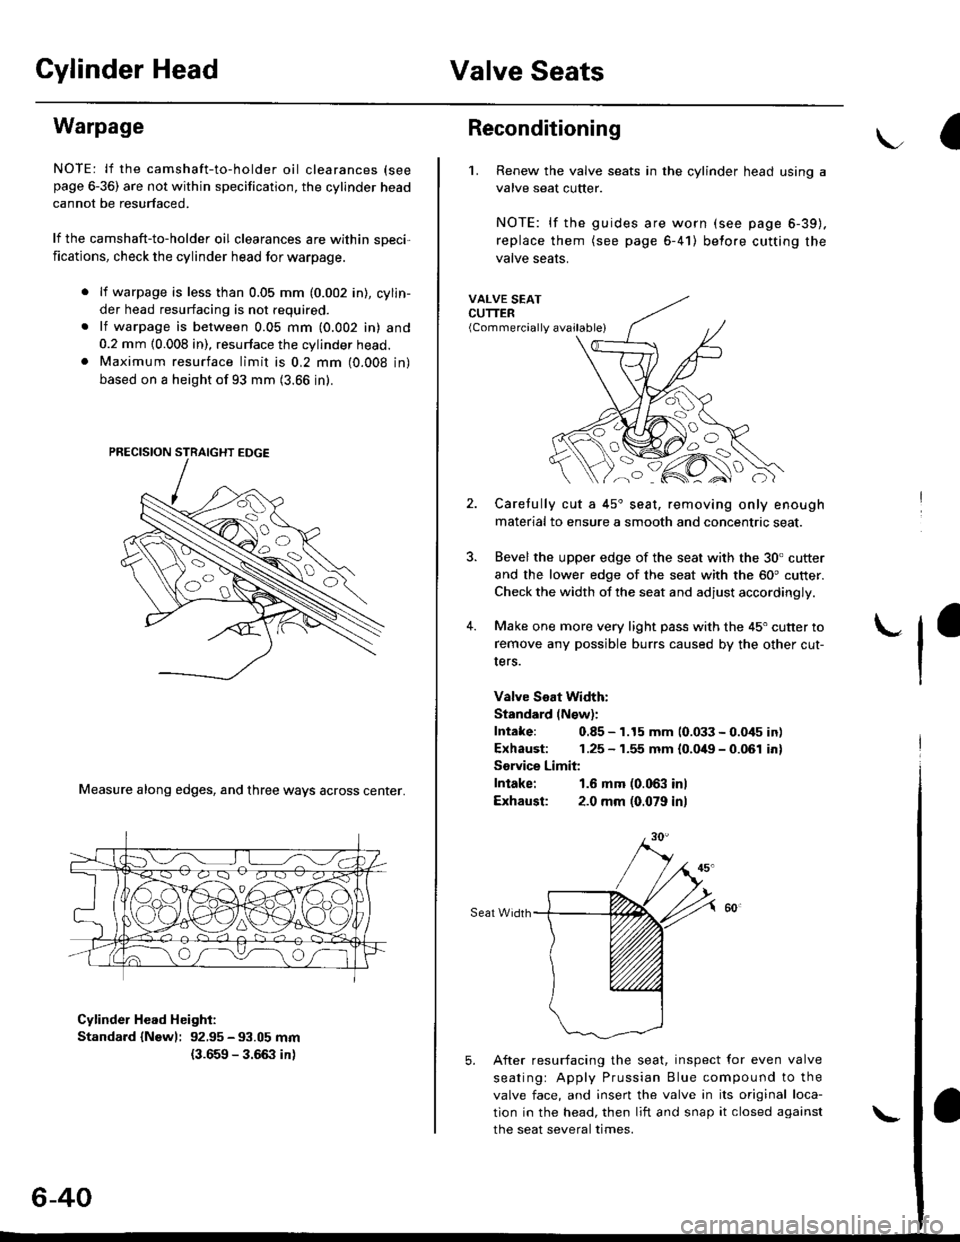 HONDA CIVIC 1999 6.G Workshop Manual Cylinder HeadValve Seats
Warpage
NOTE: lf the camshaft-to-holder oil clearances (see
page 6-36) are not within specification, the cylinder head
cannot be resurfaced.
lf the camshaft-to-holder oil clea